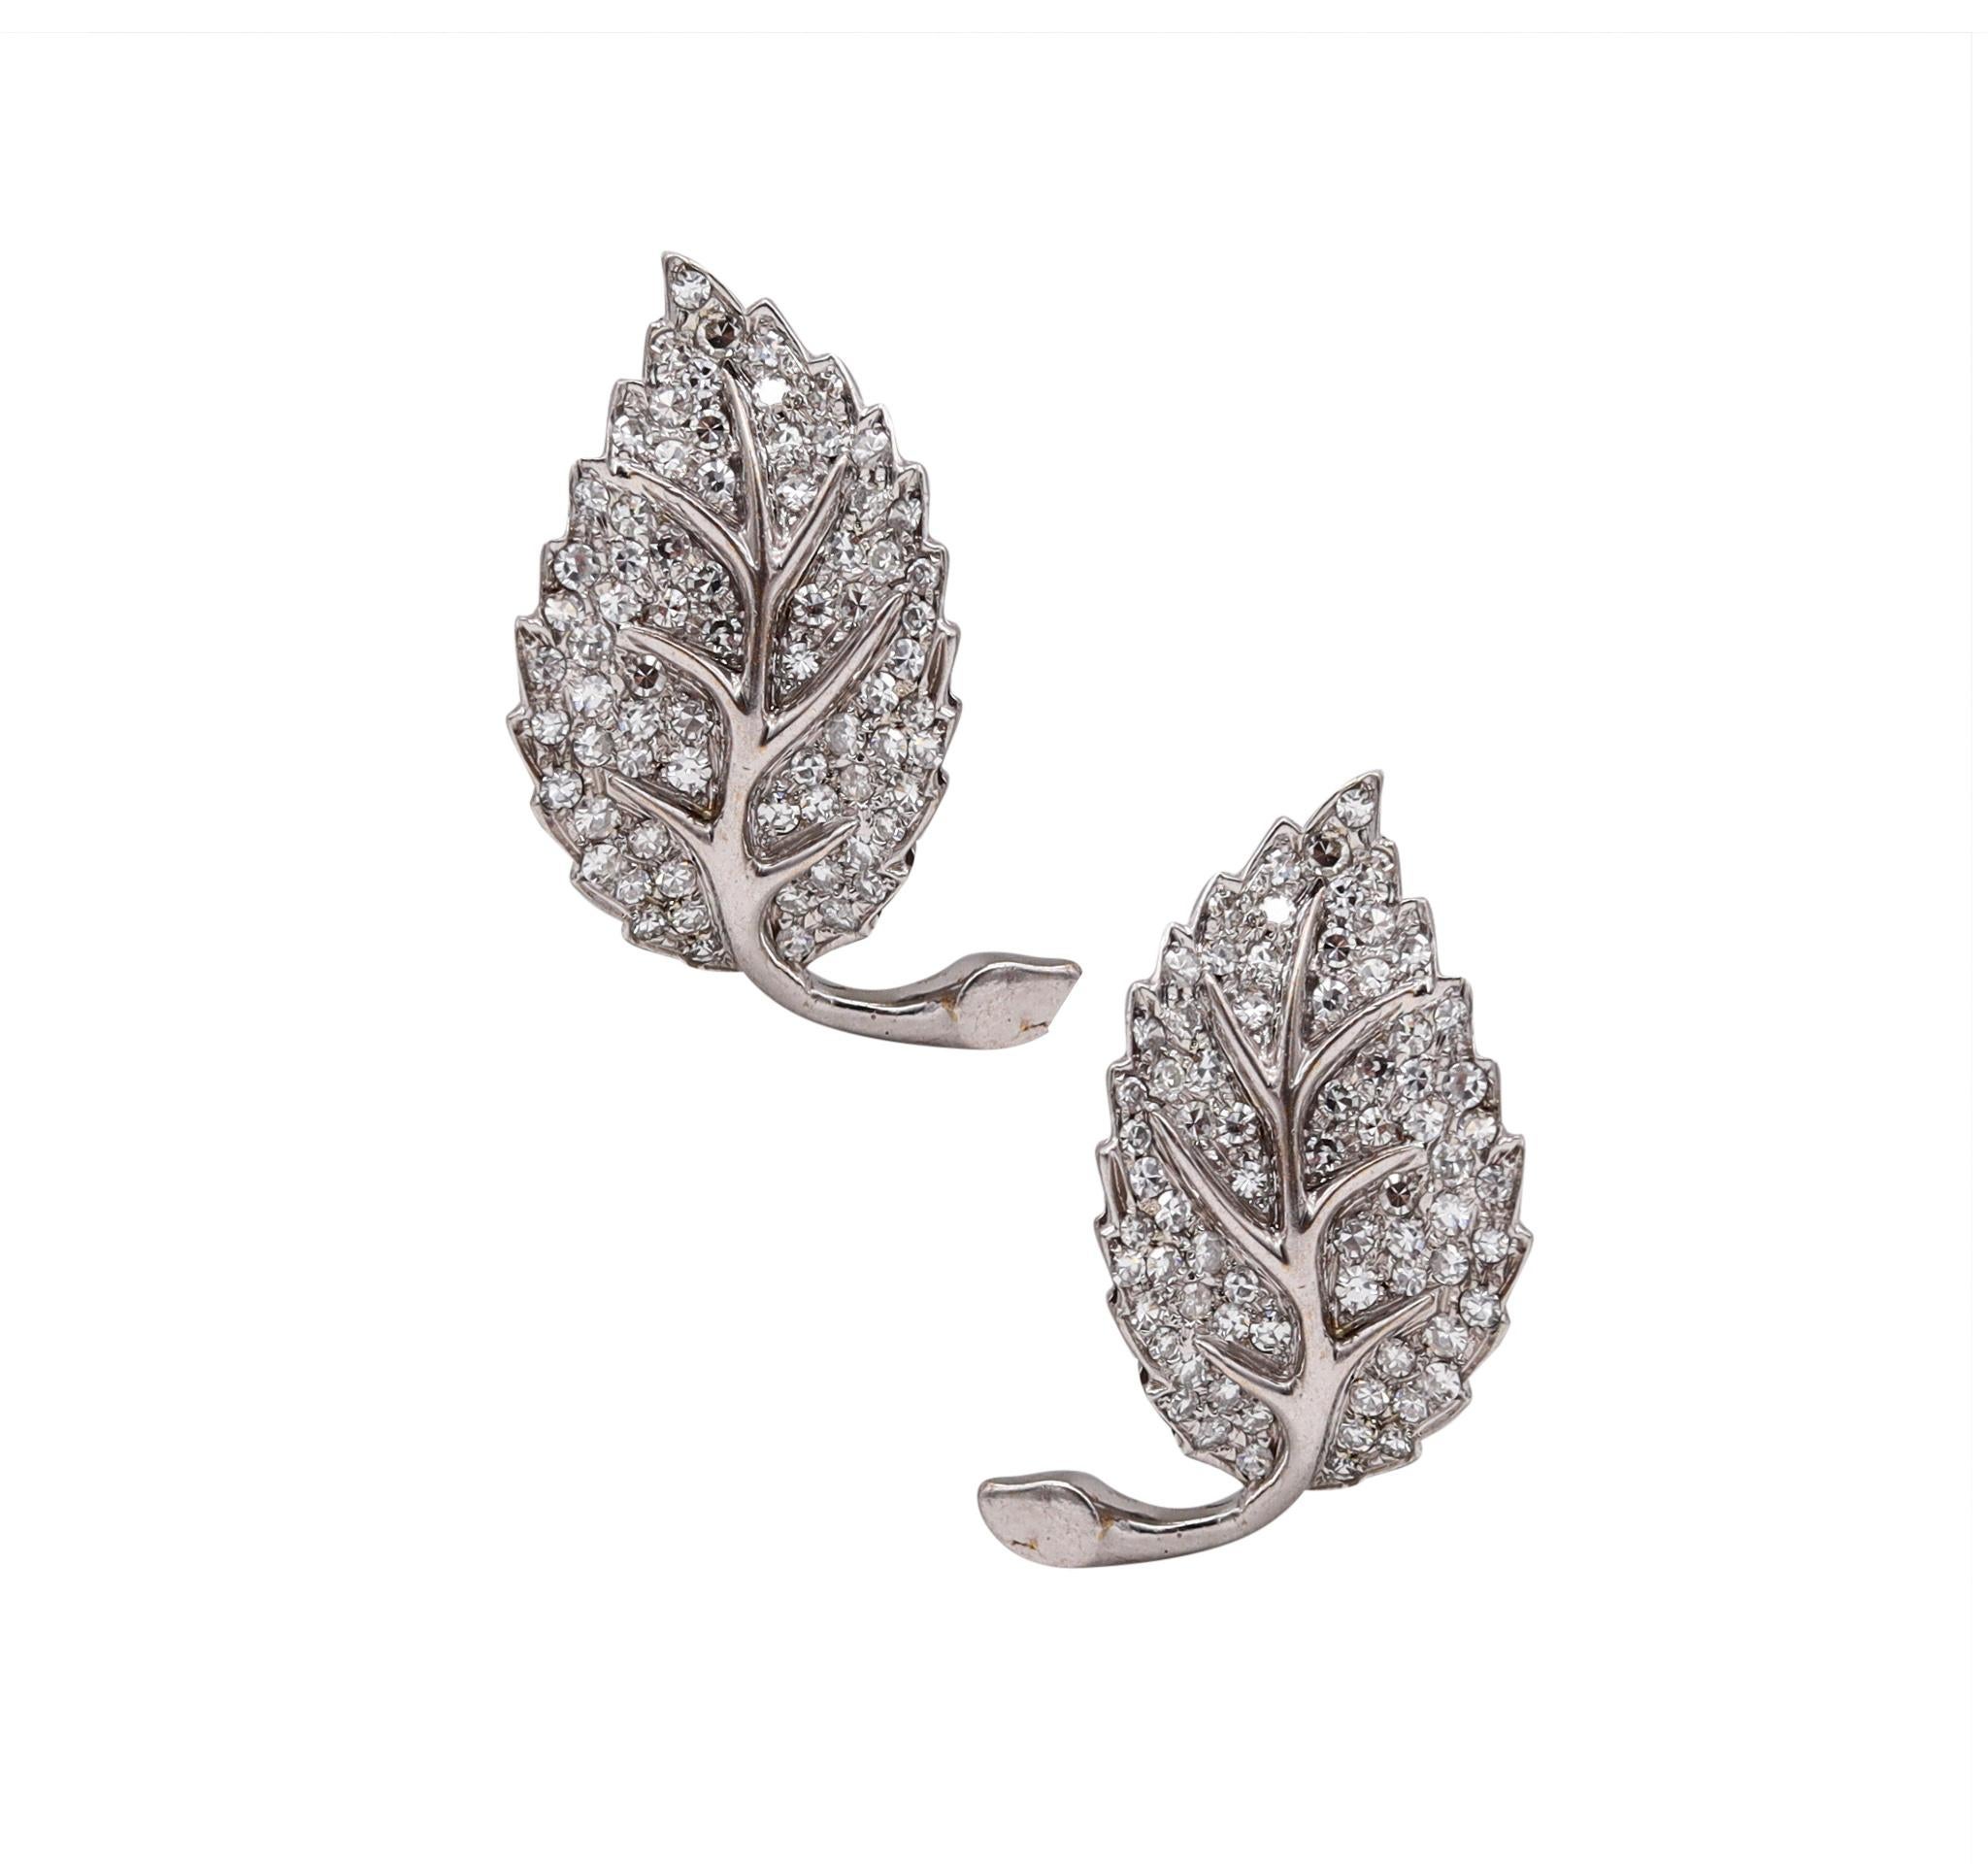 Art Deco Leaf earrings designed by Gino Pederzani.

Gorgeous vintage pieces, created in Milano Italy, by the famed jewelry house of Pederzani, back in the late 1940's. This mirrored pair has been crafted with Art-Deco patterns in solid .900/.999